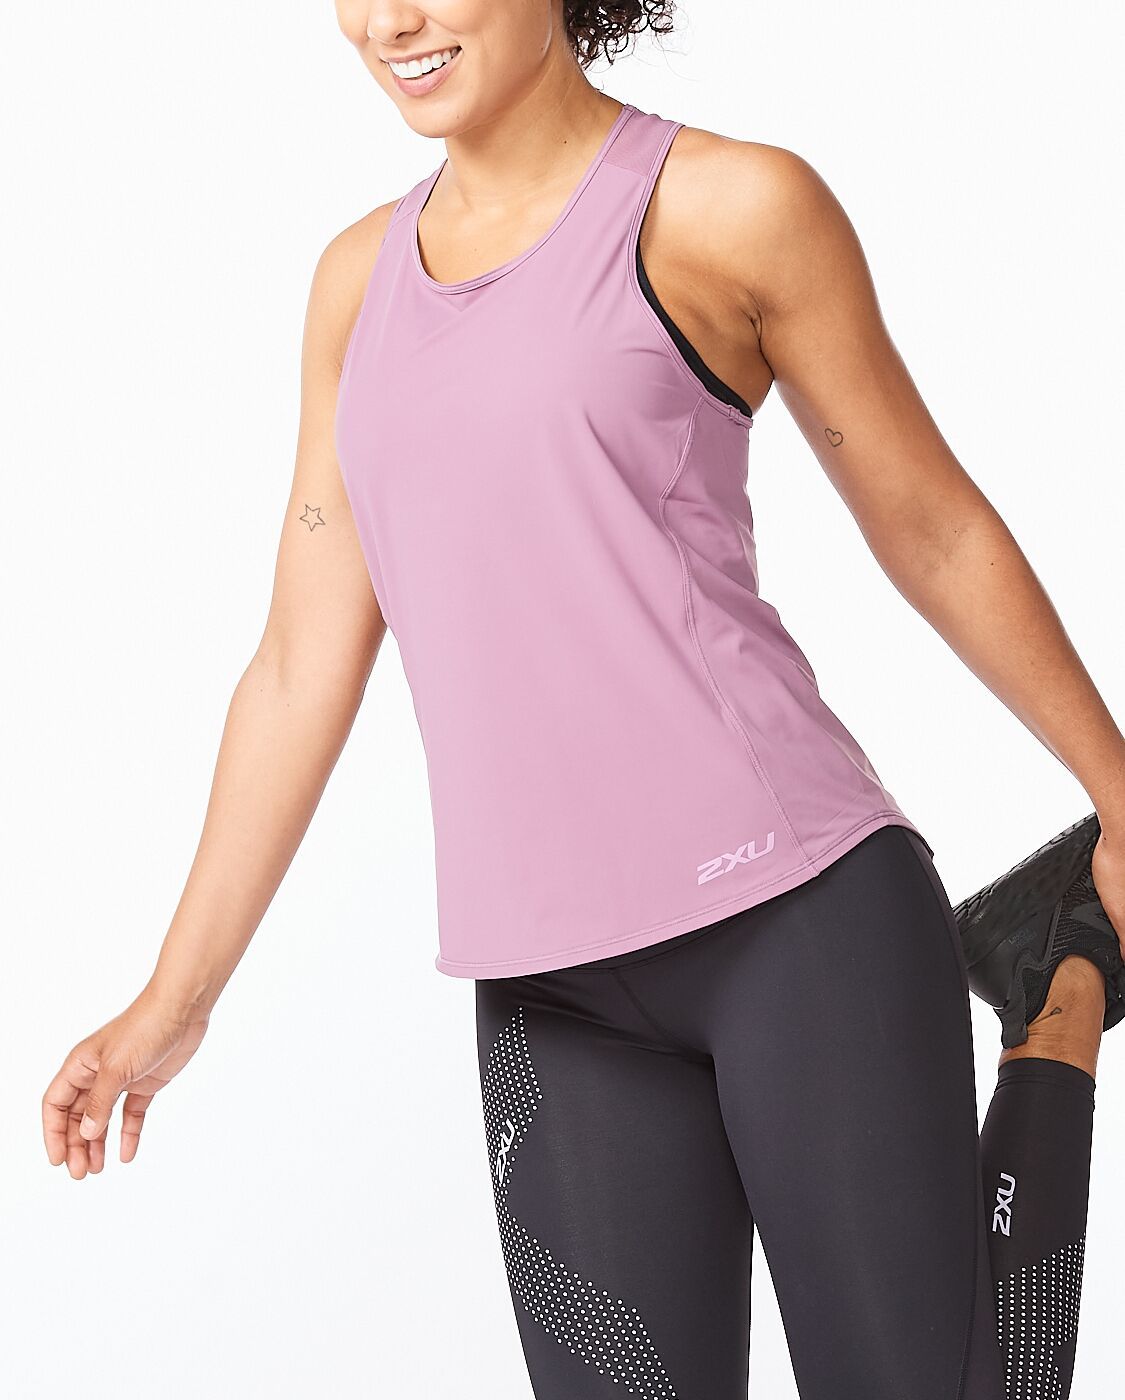 2XU South Africa - Women's Motion Mesh Tank - Orchid Mist/Lavender Herb